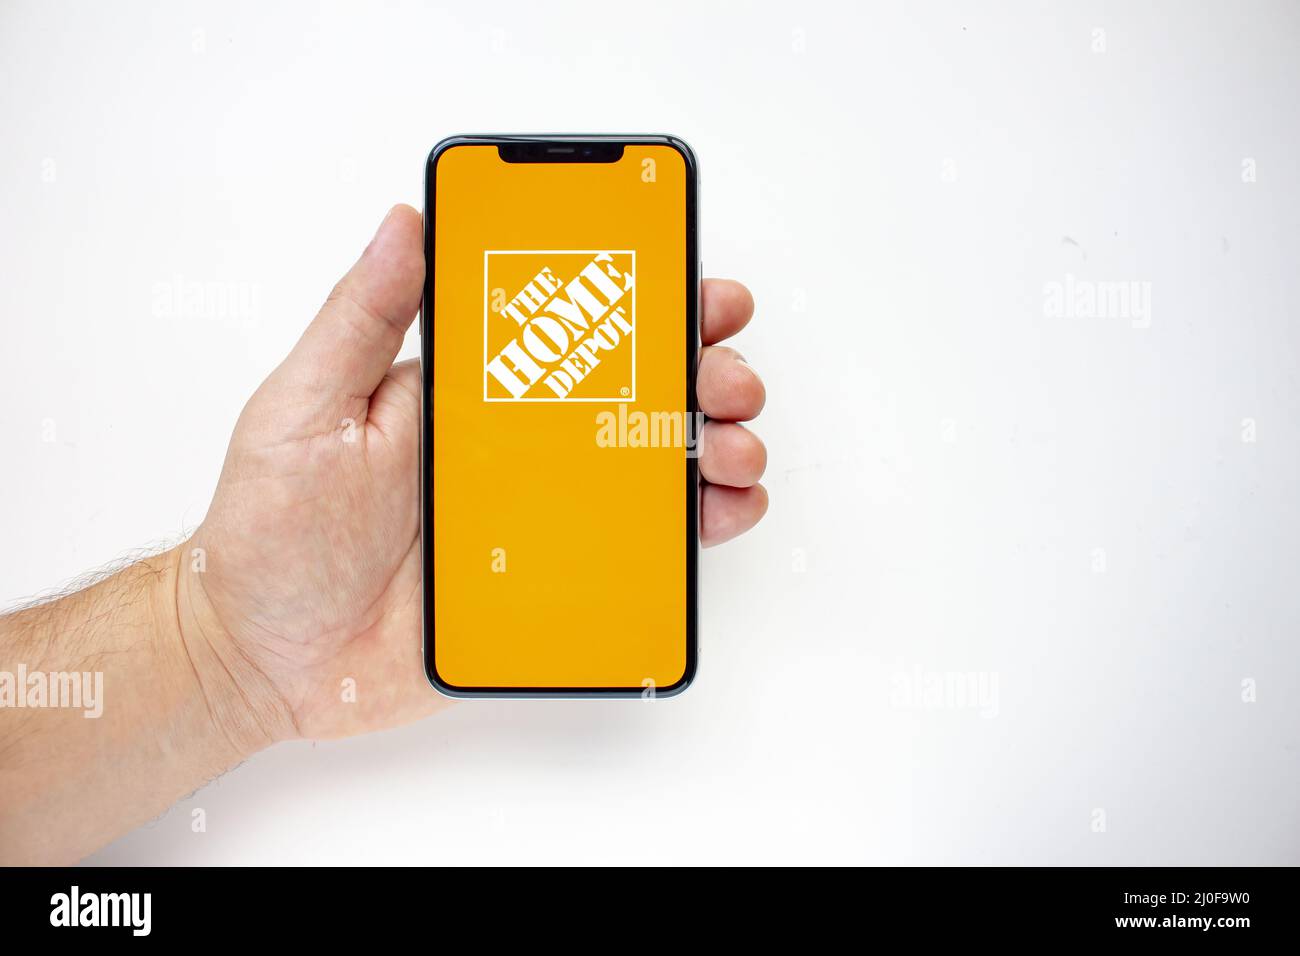 Calgary, Alberta, Canada. Aug 15, 2020. A person holding an iPhone 11 Pro Max with the Home Depot App Stock Photo